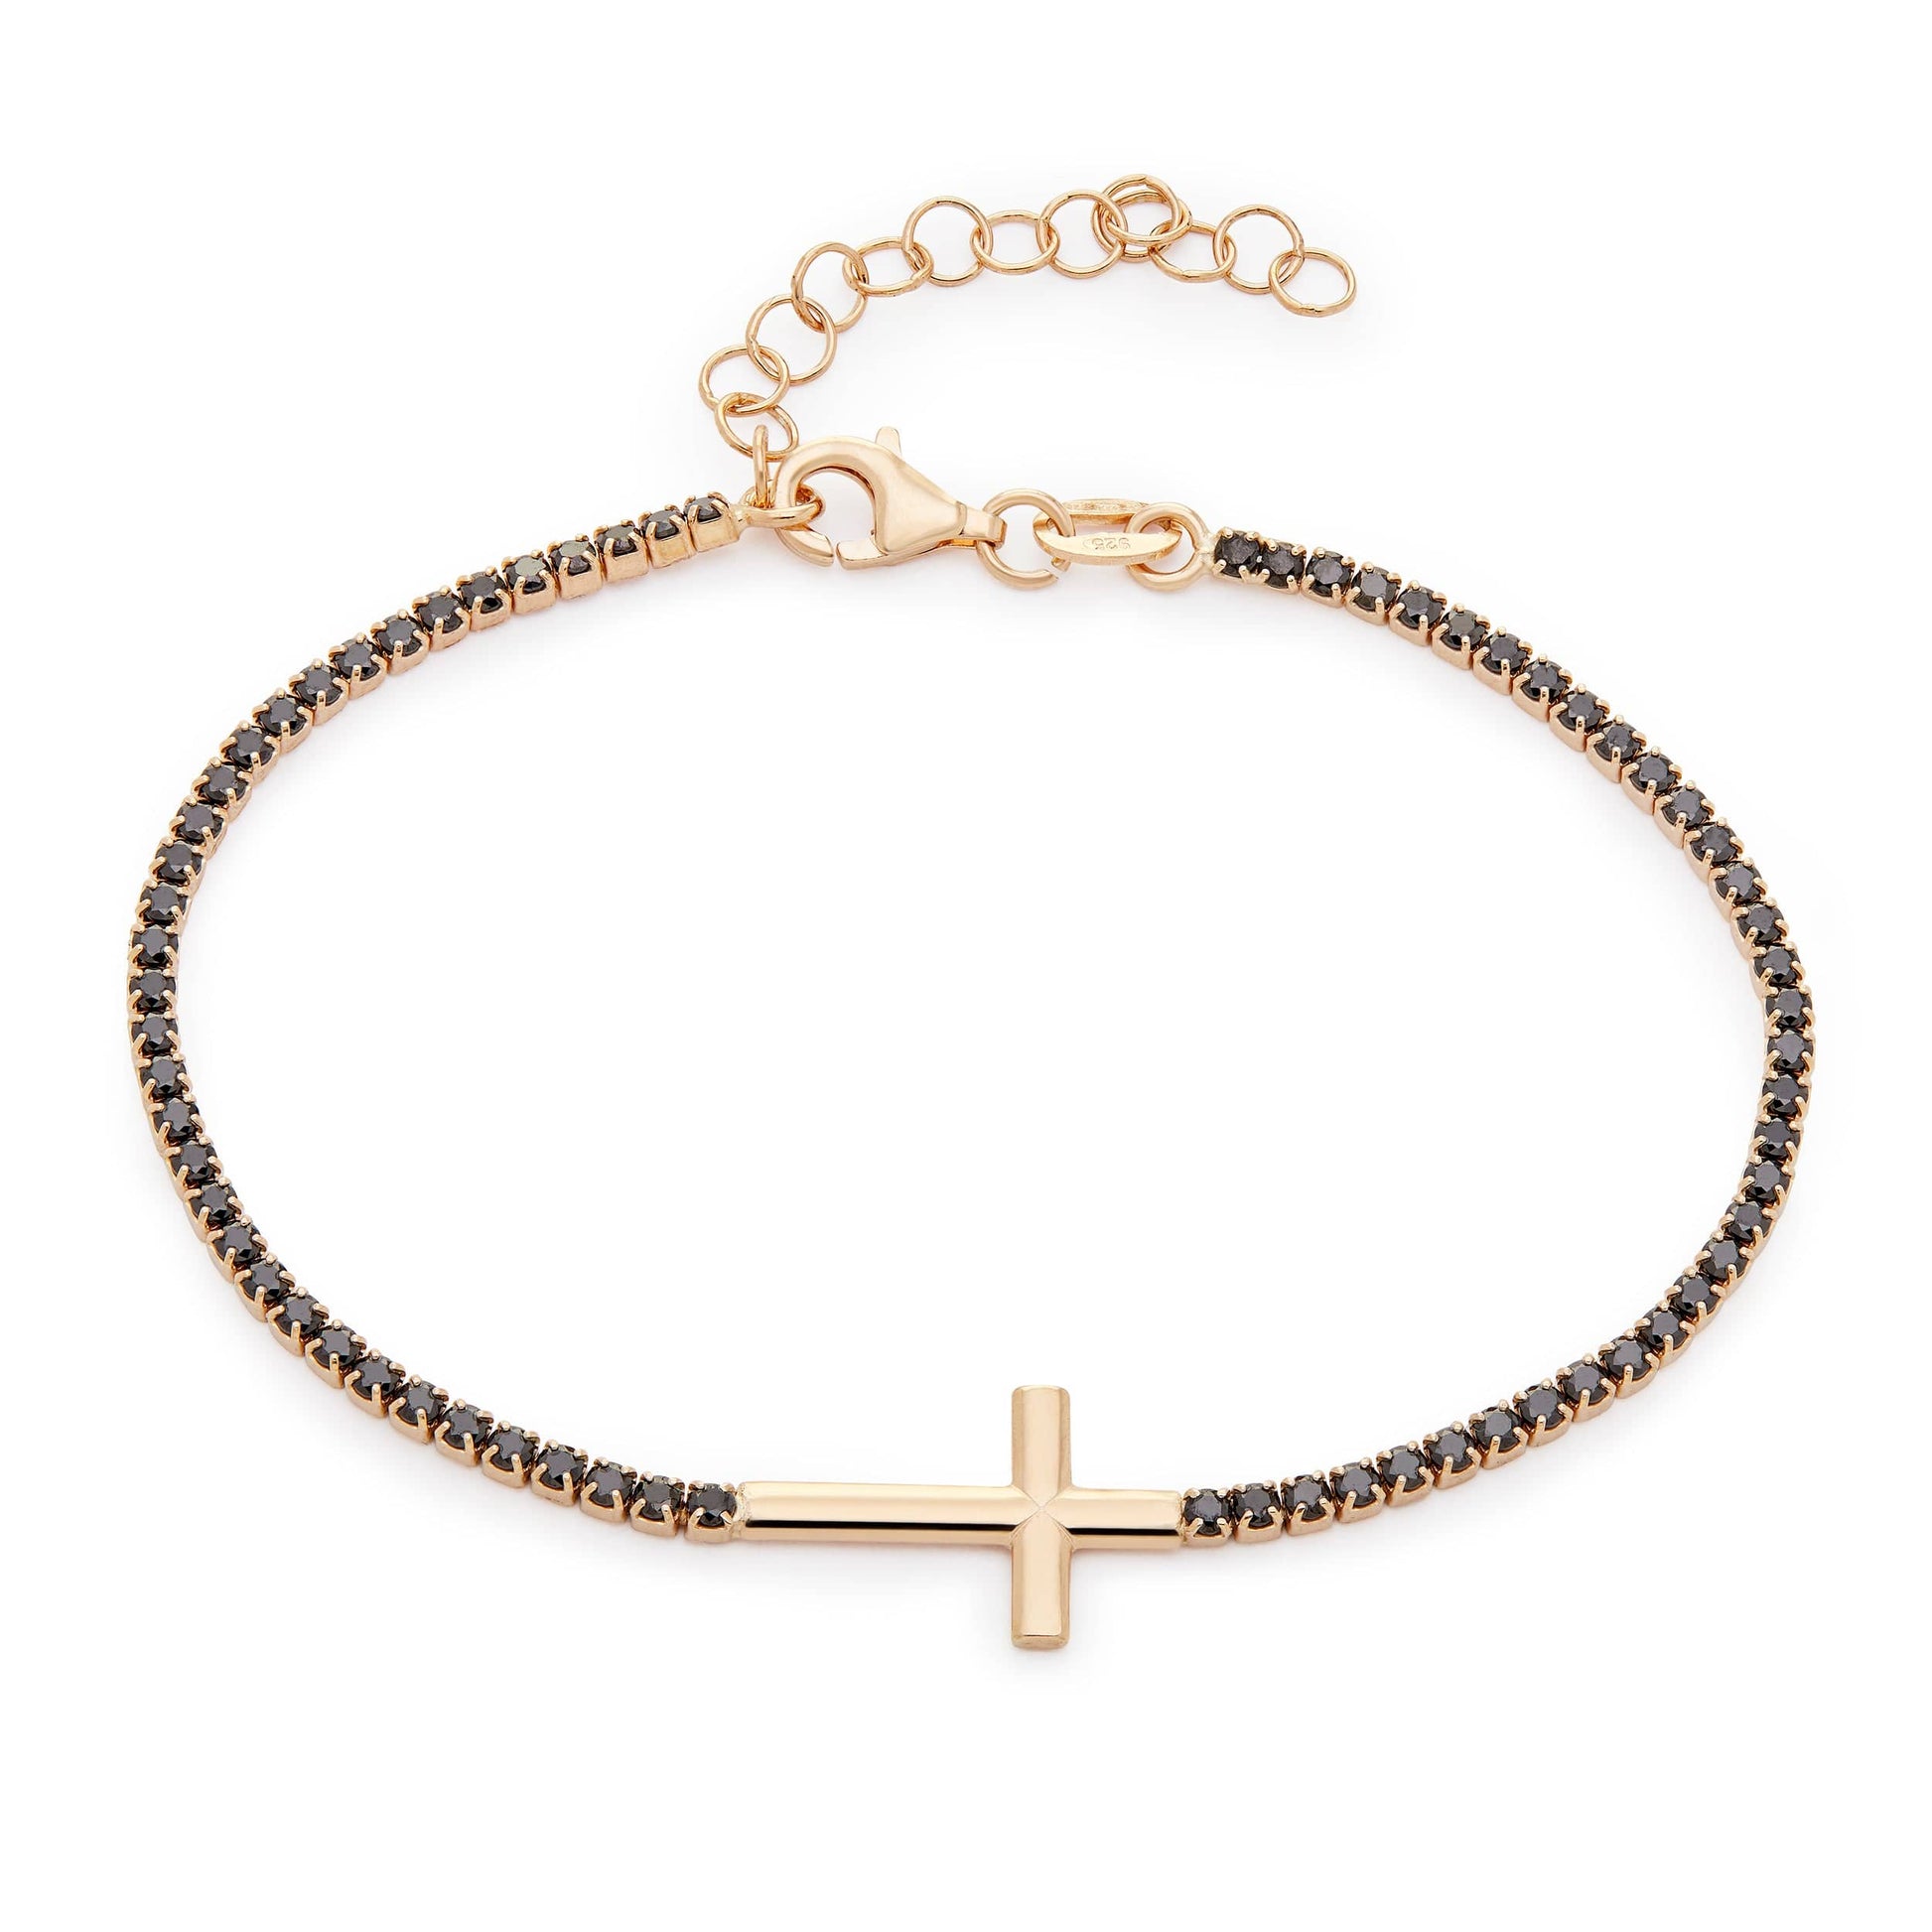 MONDO CATTOLICO Apparel & Accessories Cm 22 (8.66 in) Rose Gold Plated Bracelet with Sideways Cross